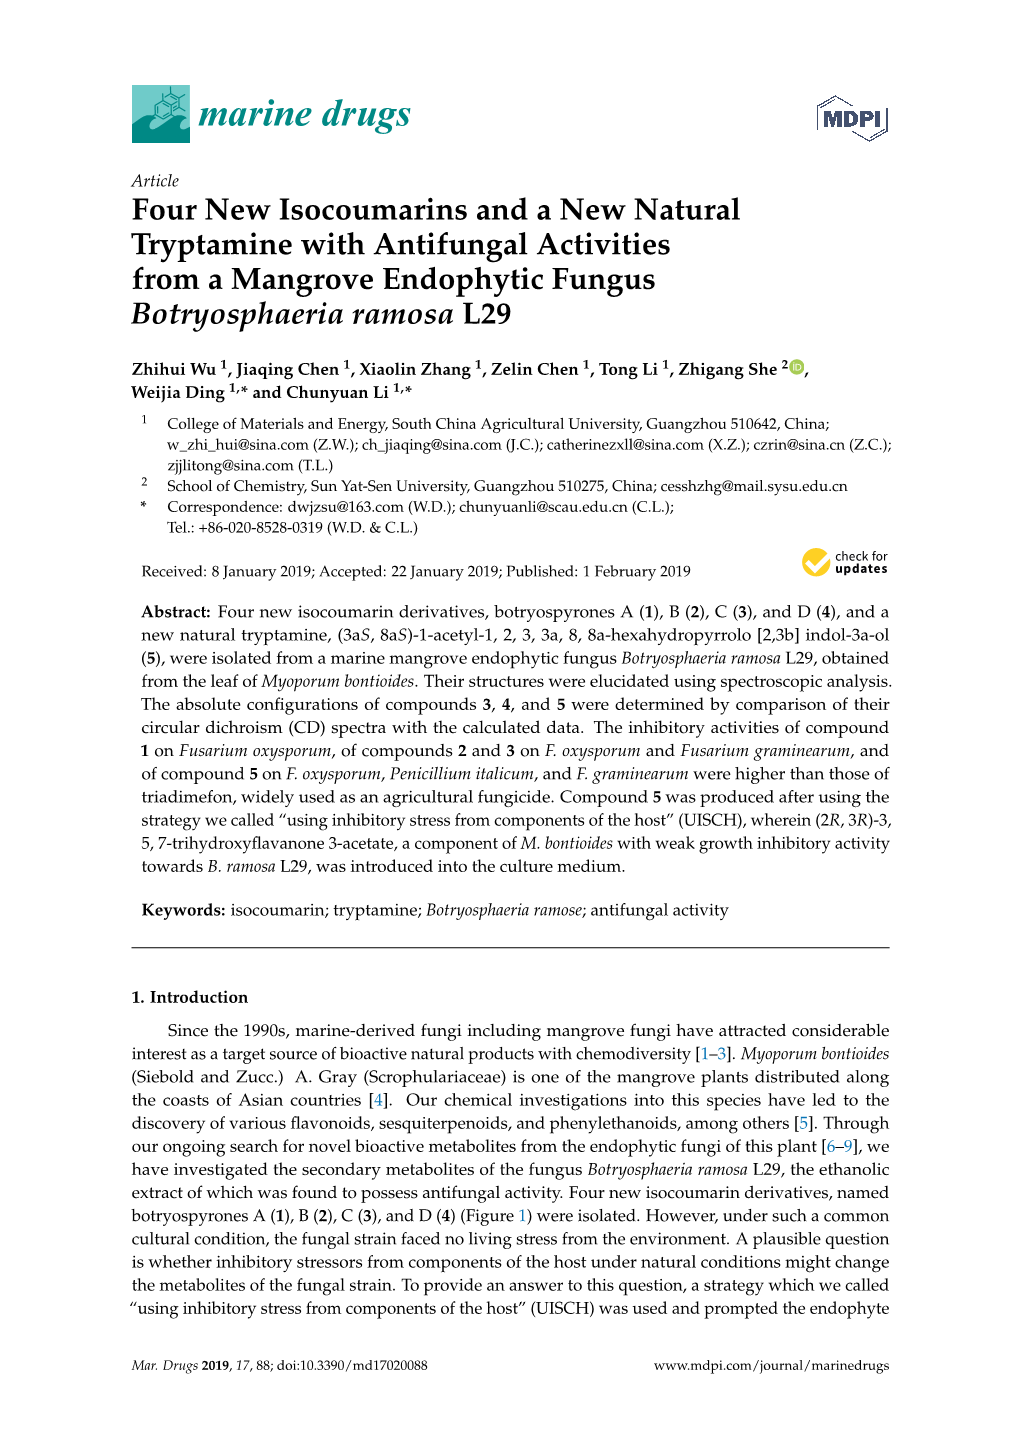 Four New Isocoumarins and a New Natural Tryptamine with Antifungal Activities from a Mangrove Endophytic Fungus Botryosphaeria Ramosa L29